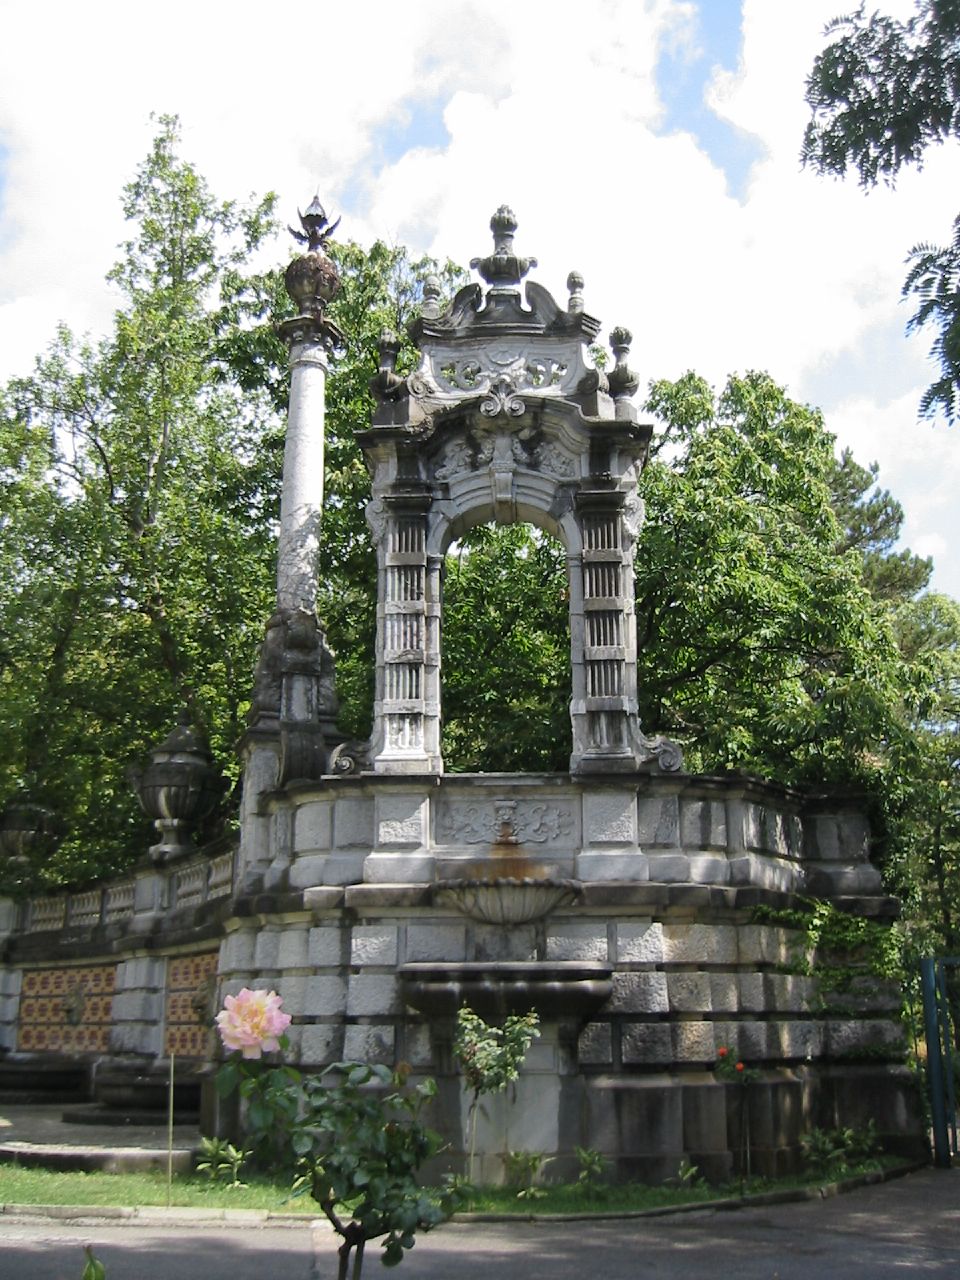 the monument was built in stone for the soldiers